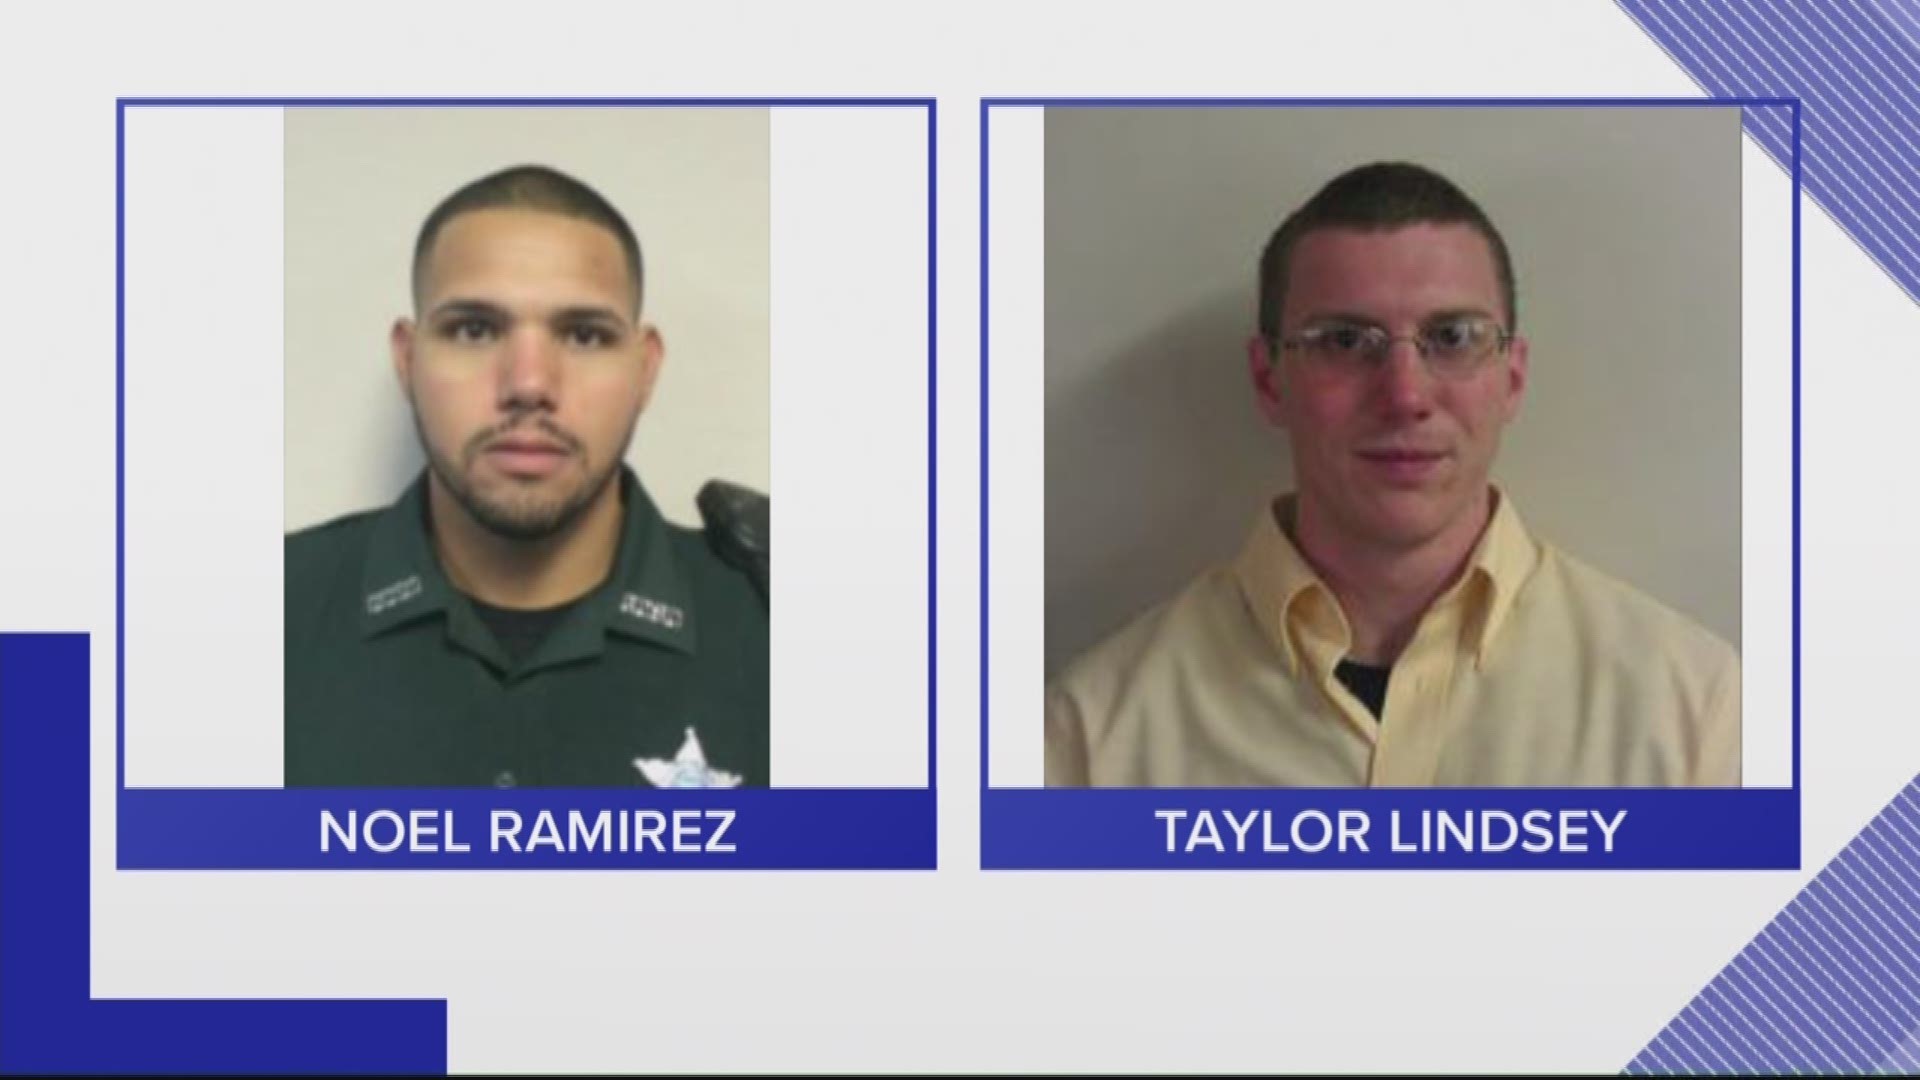 Noel Ramirez and Taylor Lindsey will be laid to rest Tuesday.